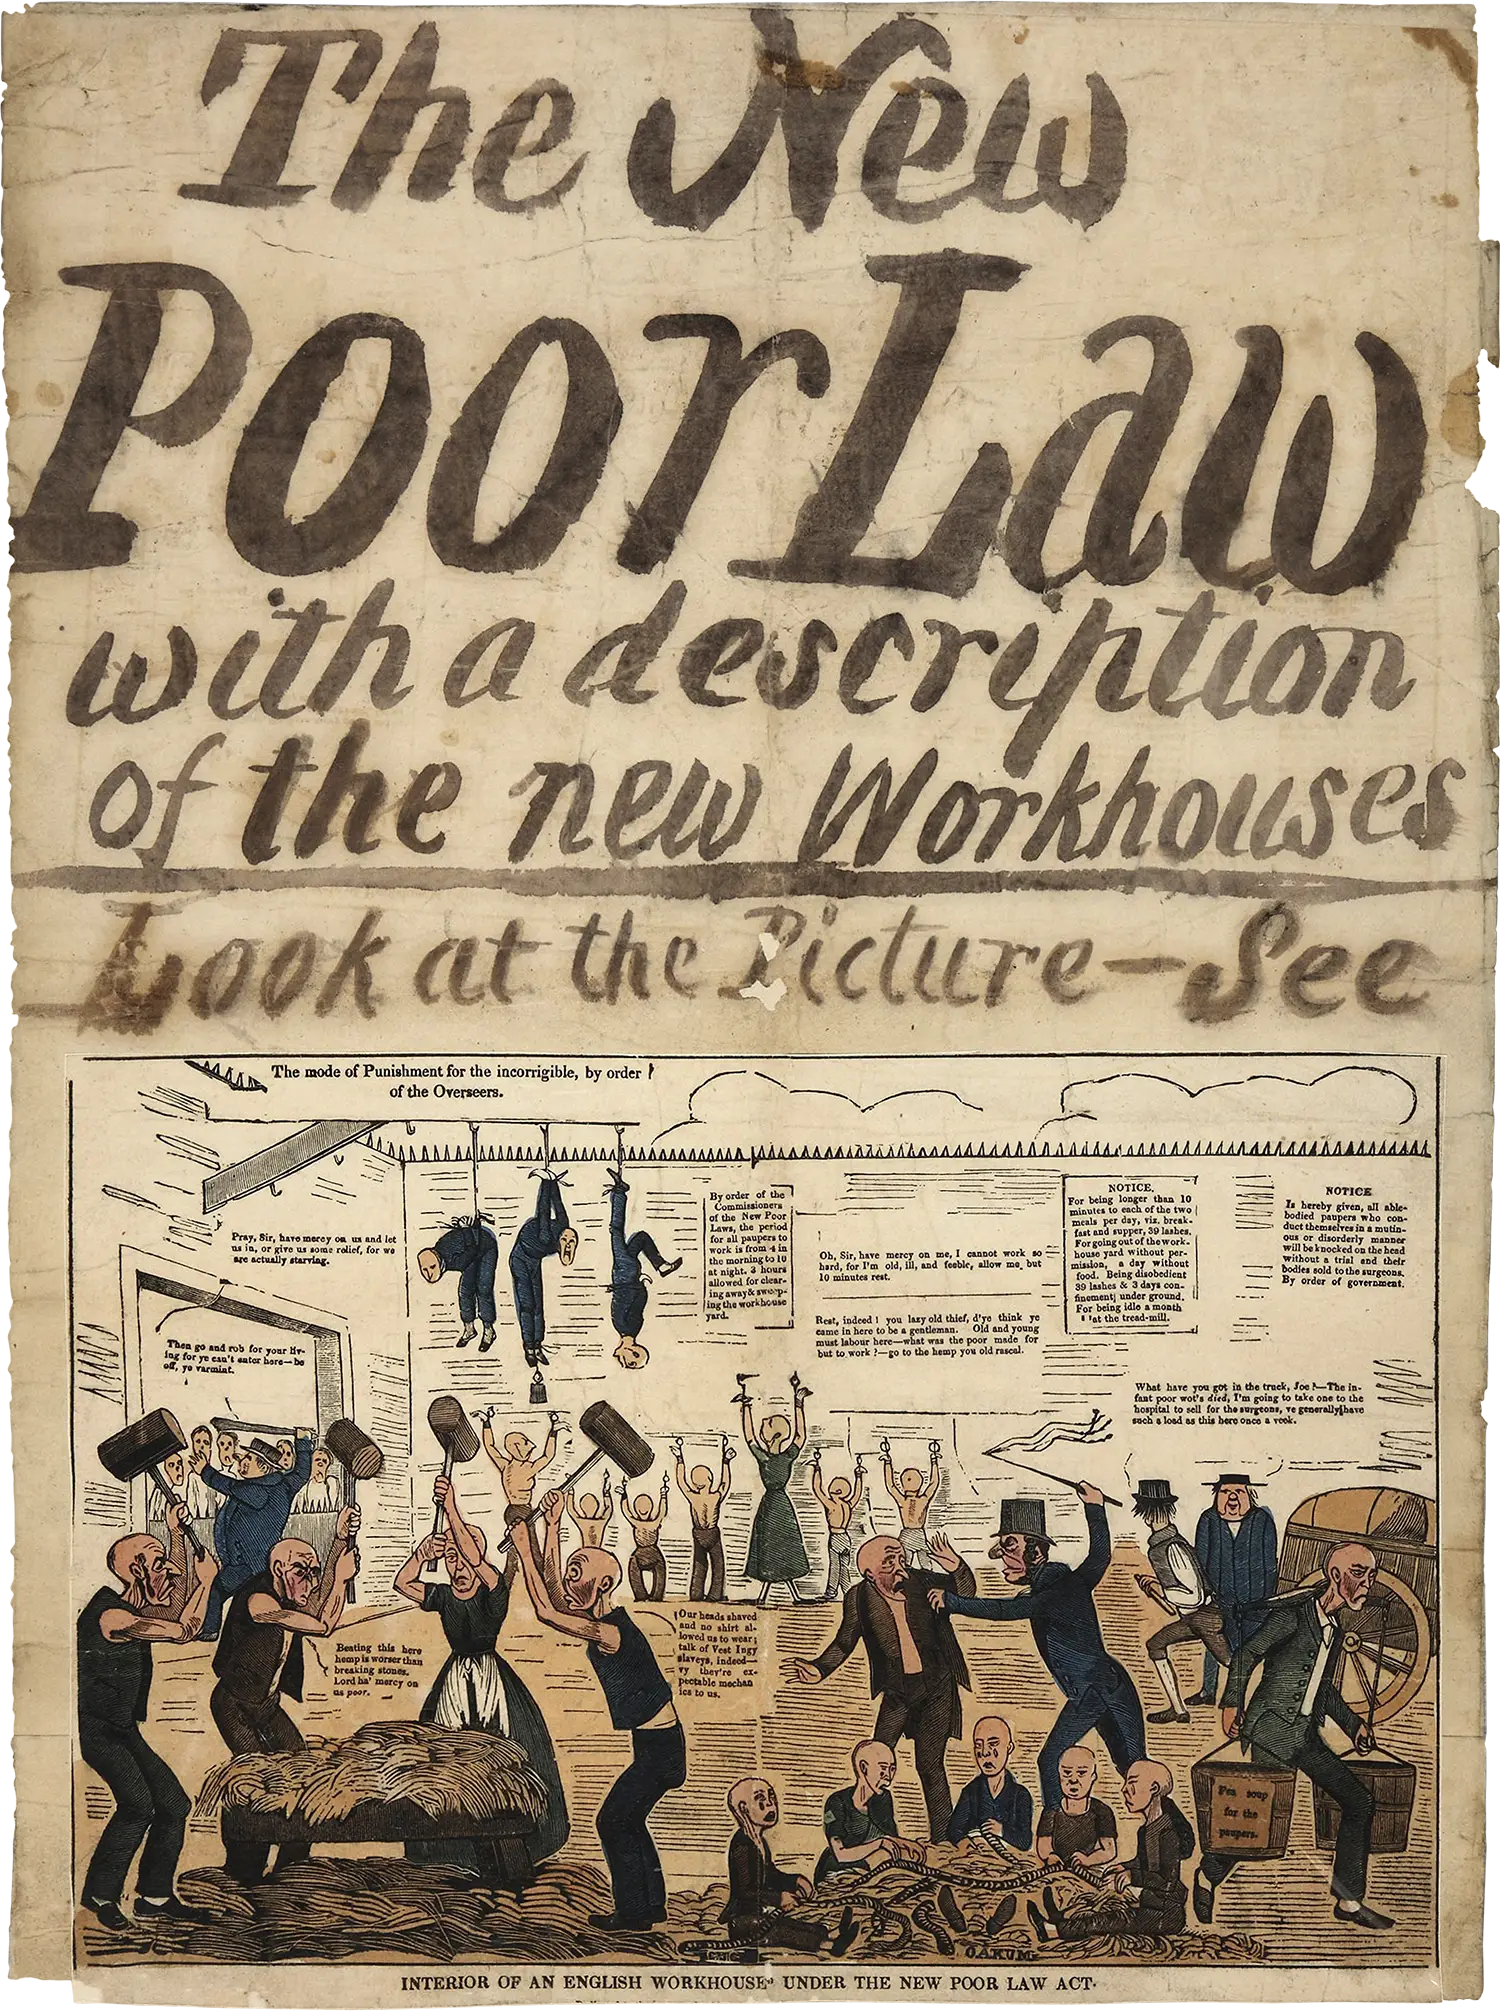 A poster titled “The New Poor Law: with a description of the new workhouses” and in the illustration below one can see people with shaved heads suffering forced labor while others endure different forms of corporal punishment. The diagram is subtitled “interior of an English workhouse under the new Poor Law Act.”